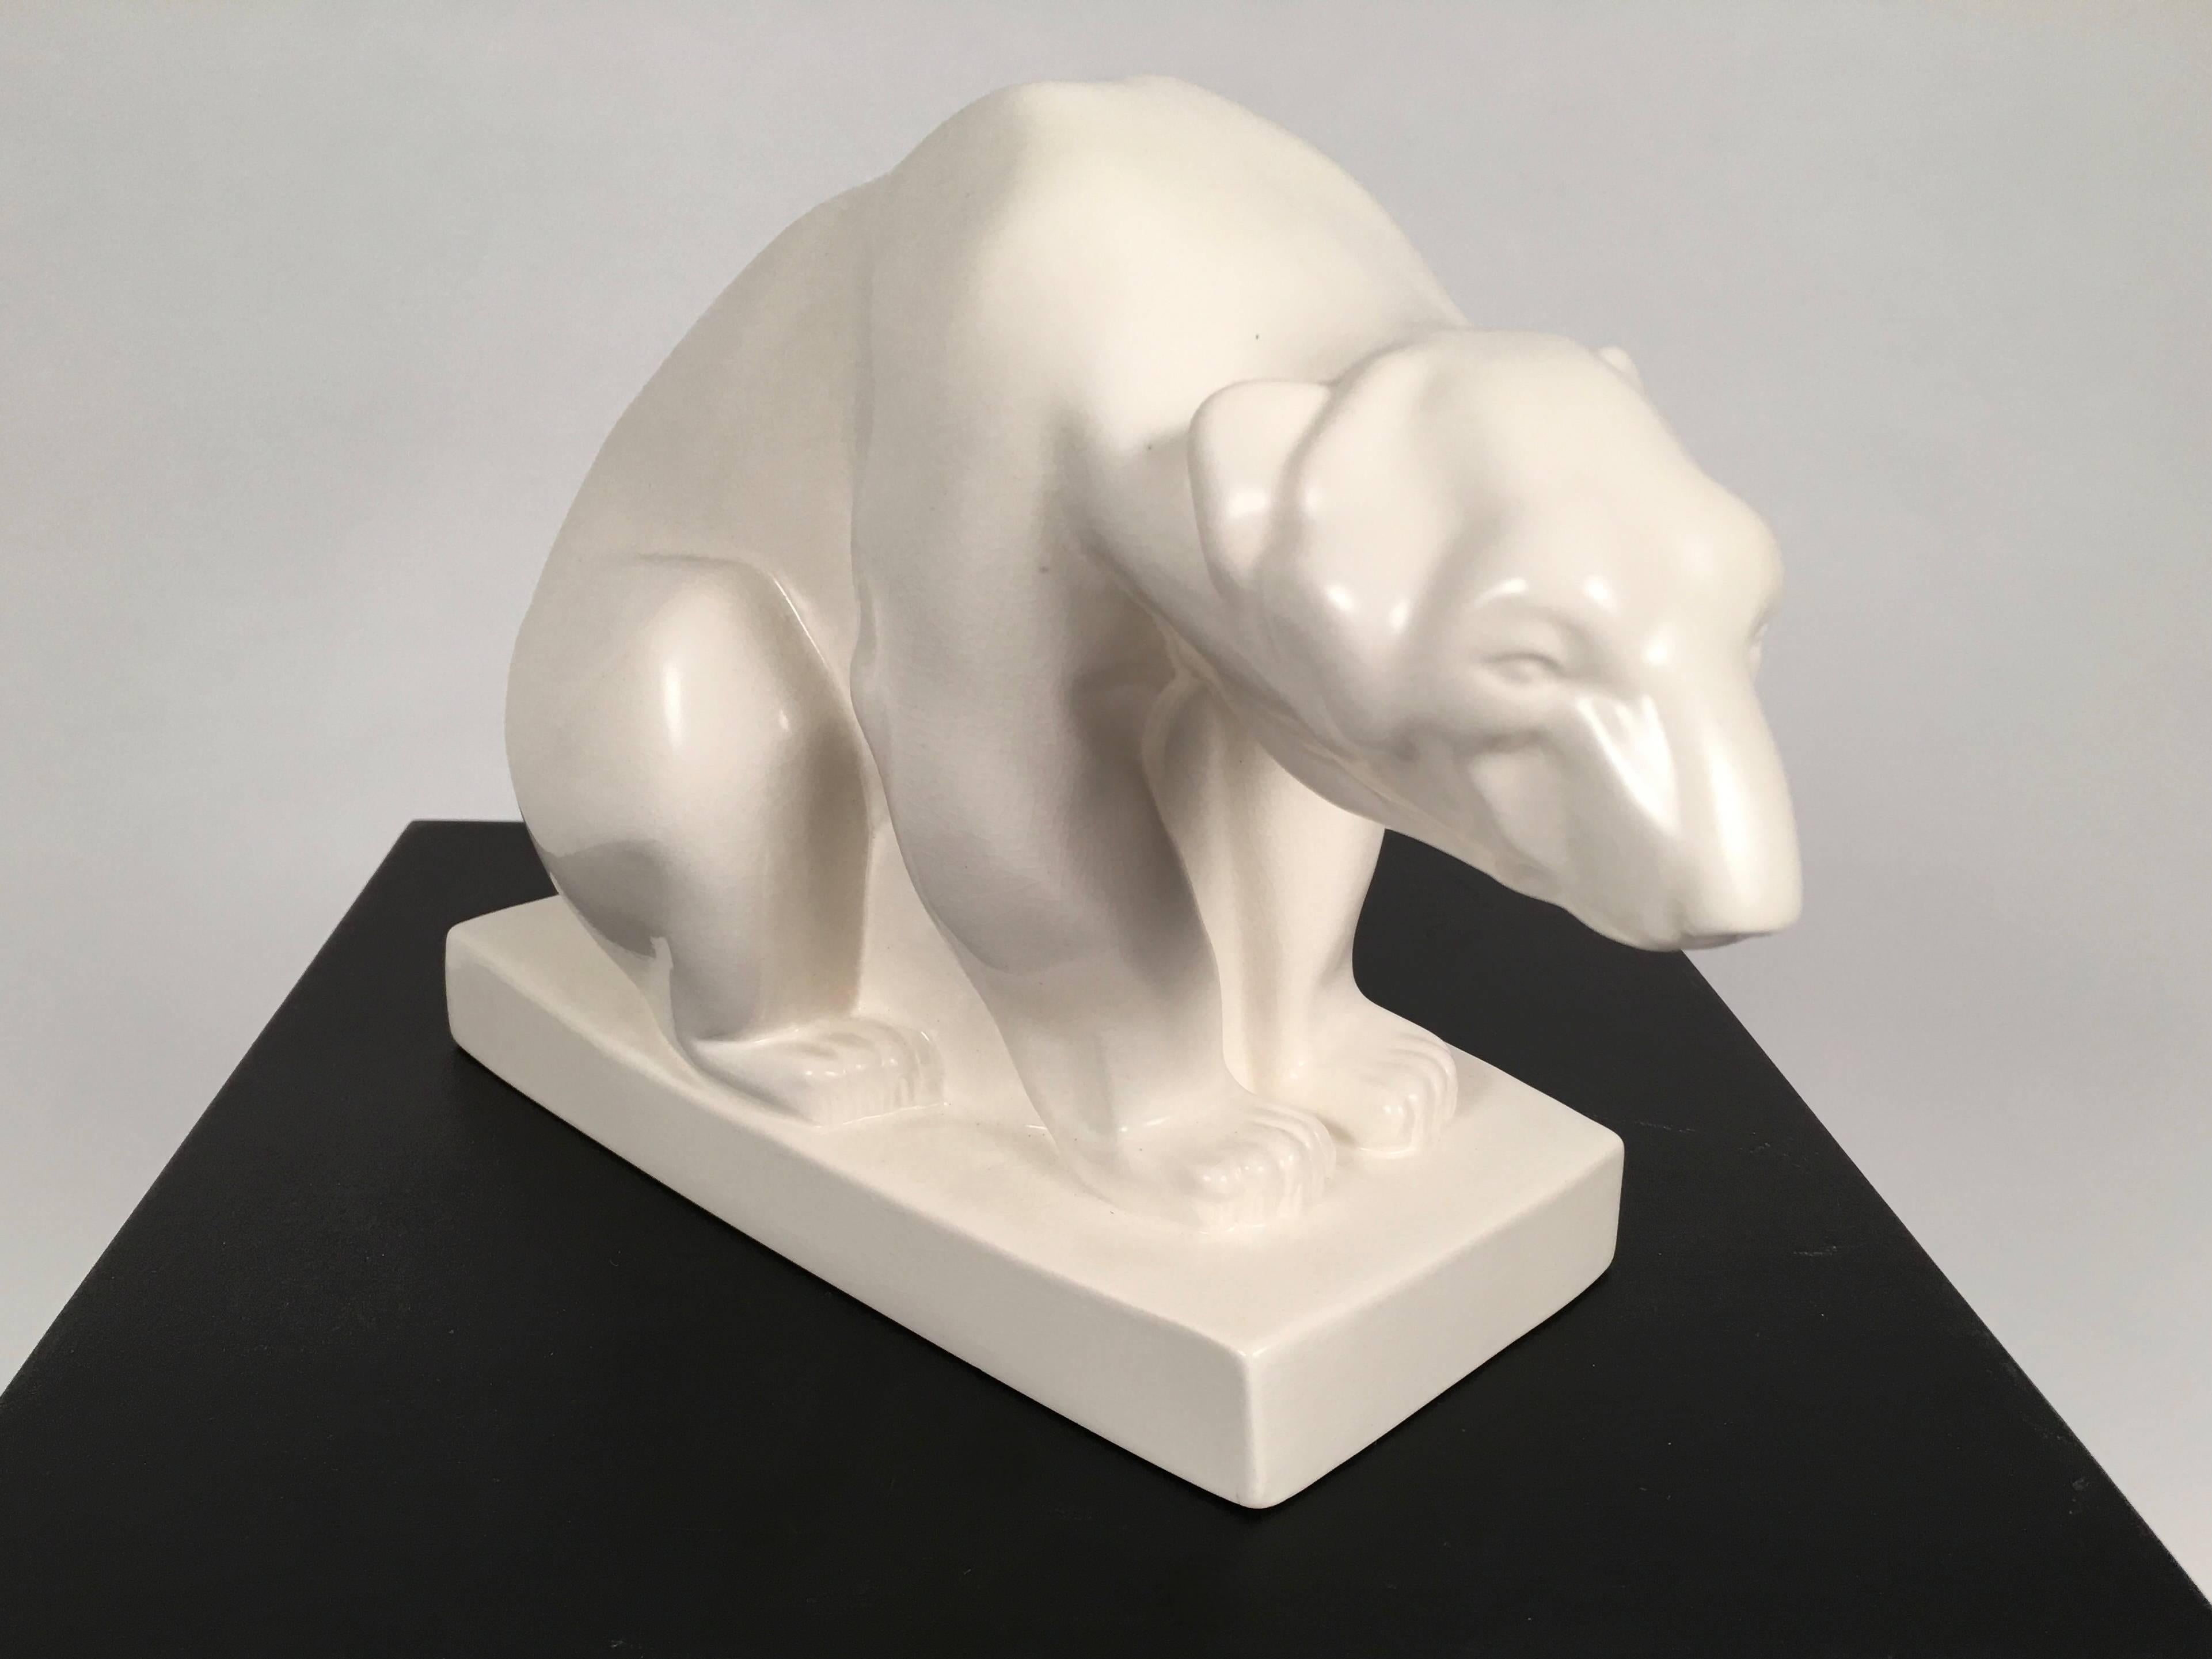 A Wedgwood moonstone pottery sculpture of a polar bear, beautifully modeled in satin, creamy white glazed ceramic designed by John Skeaping in 1927, made by Wedgwood and Sons, Barlaston, England, circa 1950. Signed with incised signature on back of